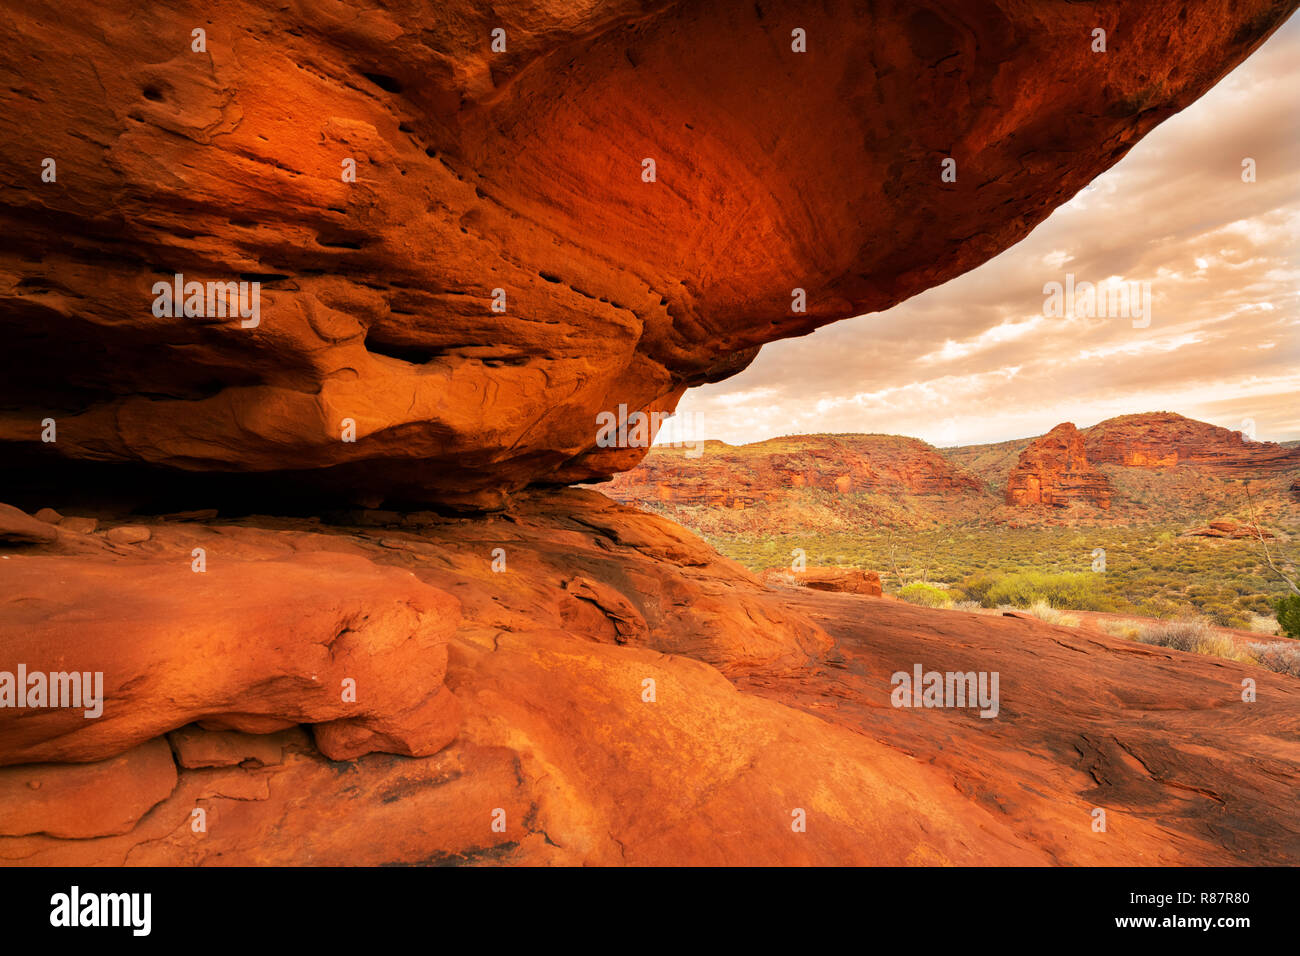 The Amphitheatre is a rock formation in Finke Gorge National Park. Stock Photo